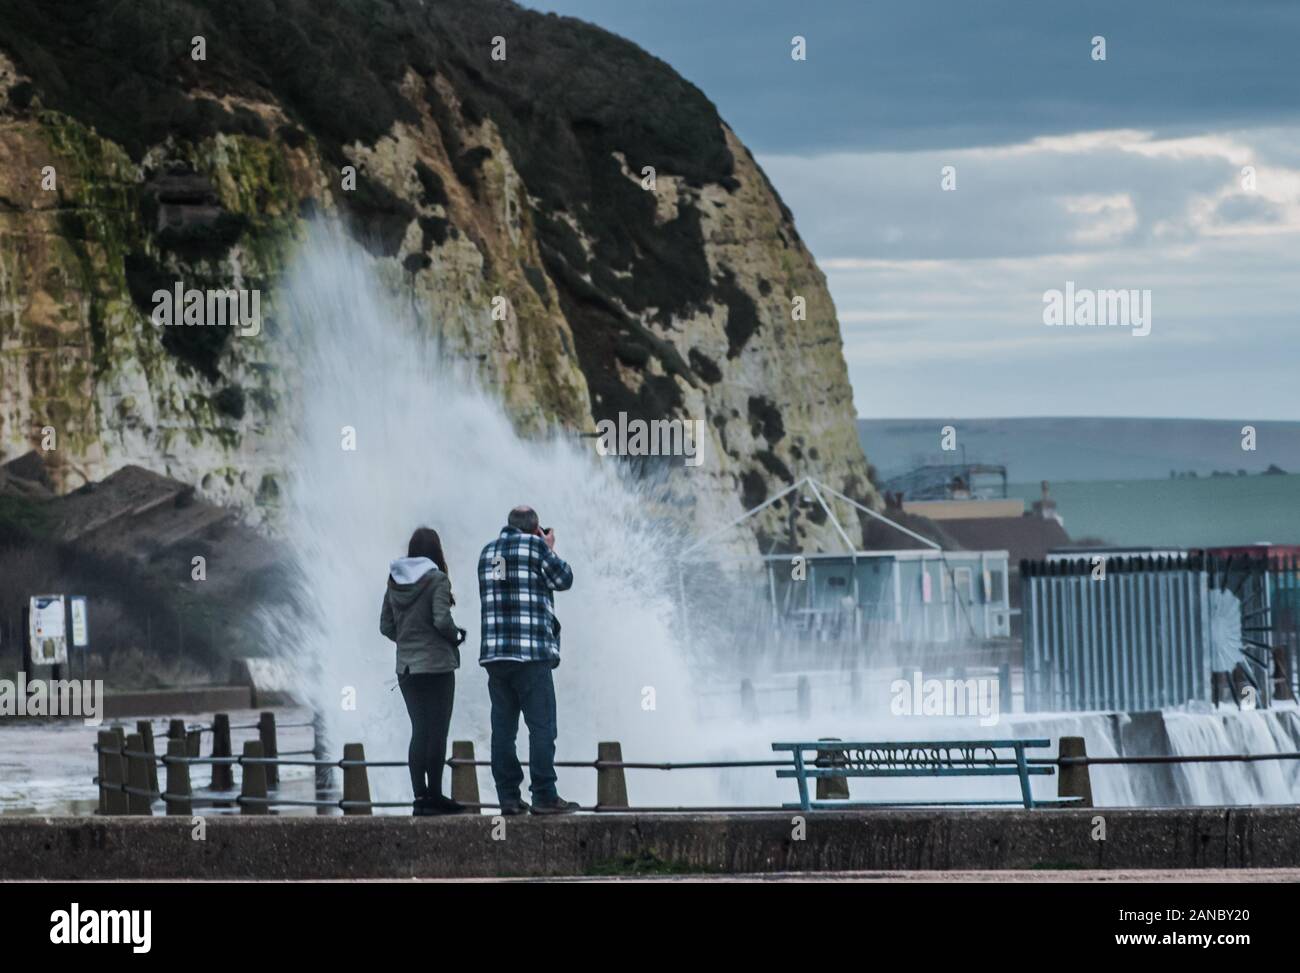 Newhaven, East Sussex, UK..16th January 2019..Increasing Southerly wind toward the end of the day funnels waves into the harbour entrance at West beach. Very heavy rain & more wind is approaching from the West increasing the flood risk along the South coast. David Burr/Alamy Live News. Stock Photo